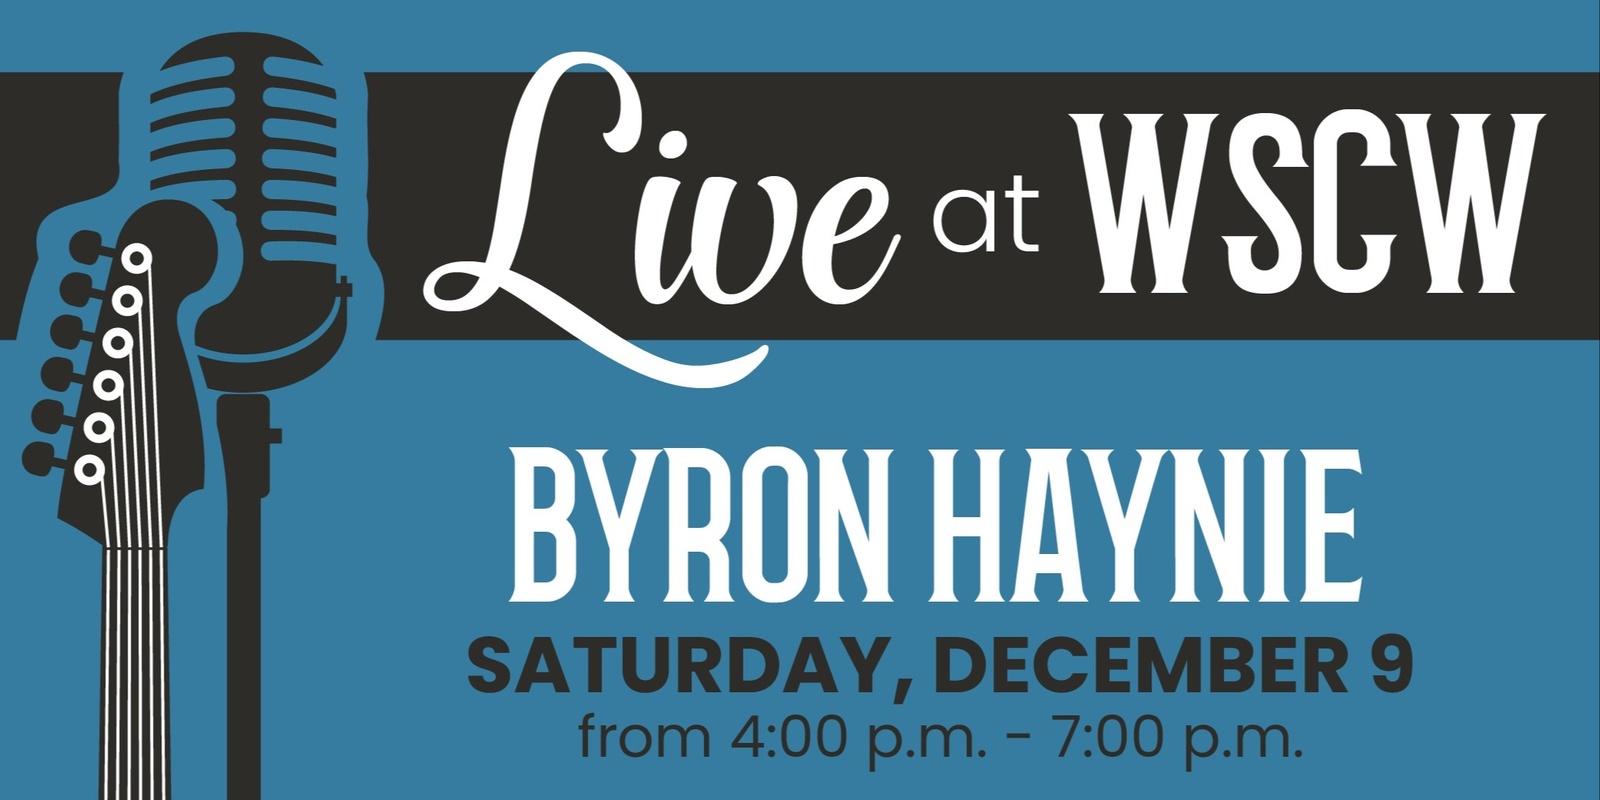 Banner image for Byron Haynie Live at WSCW December 9